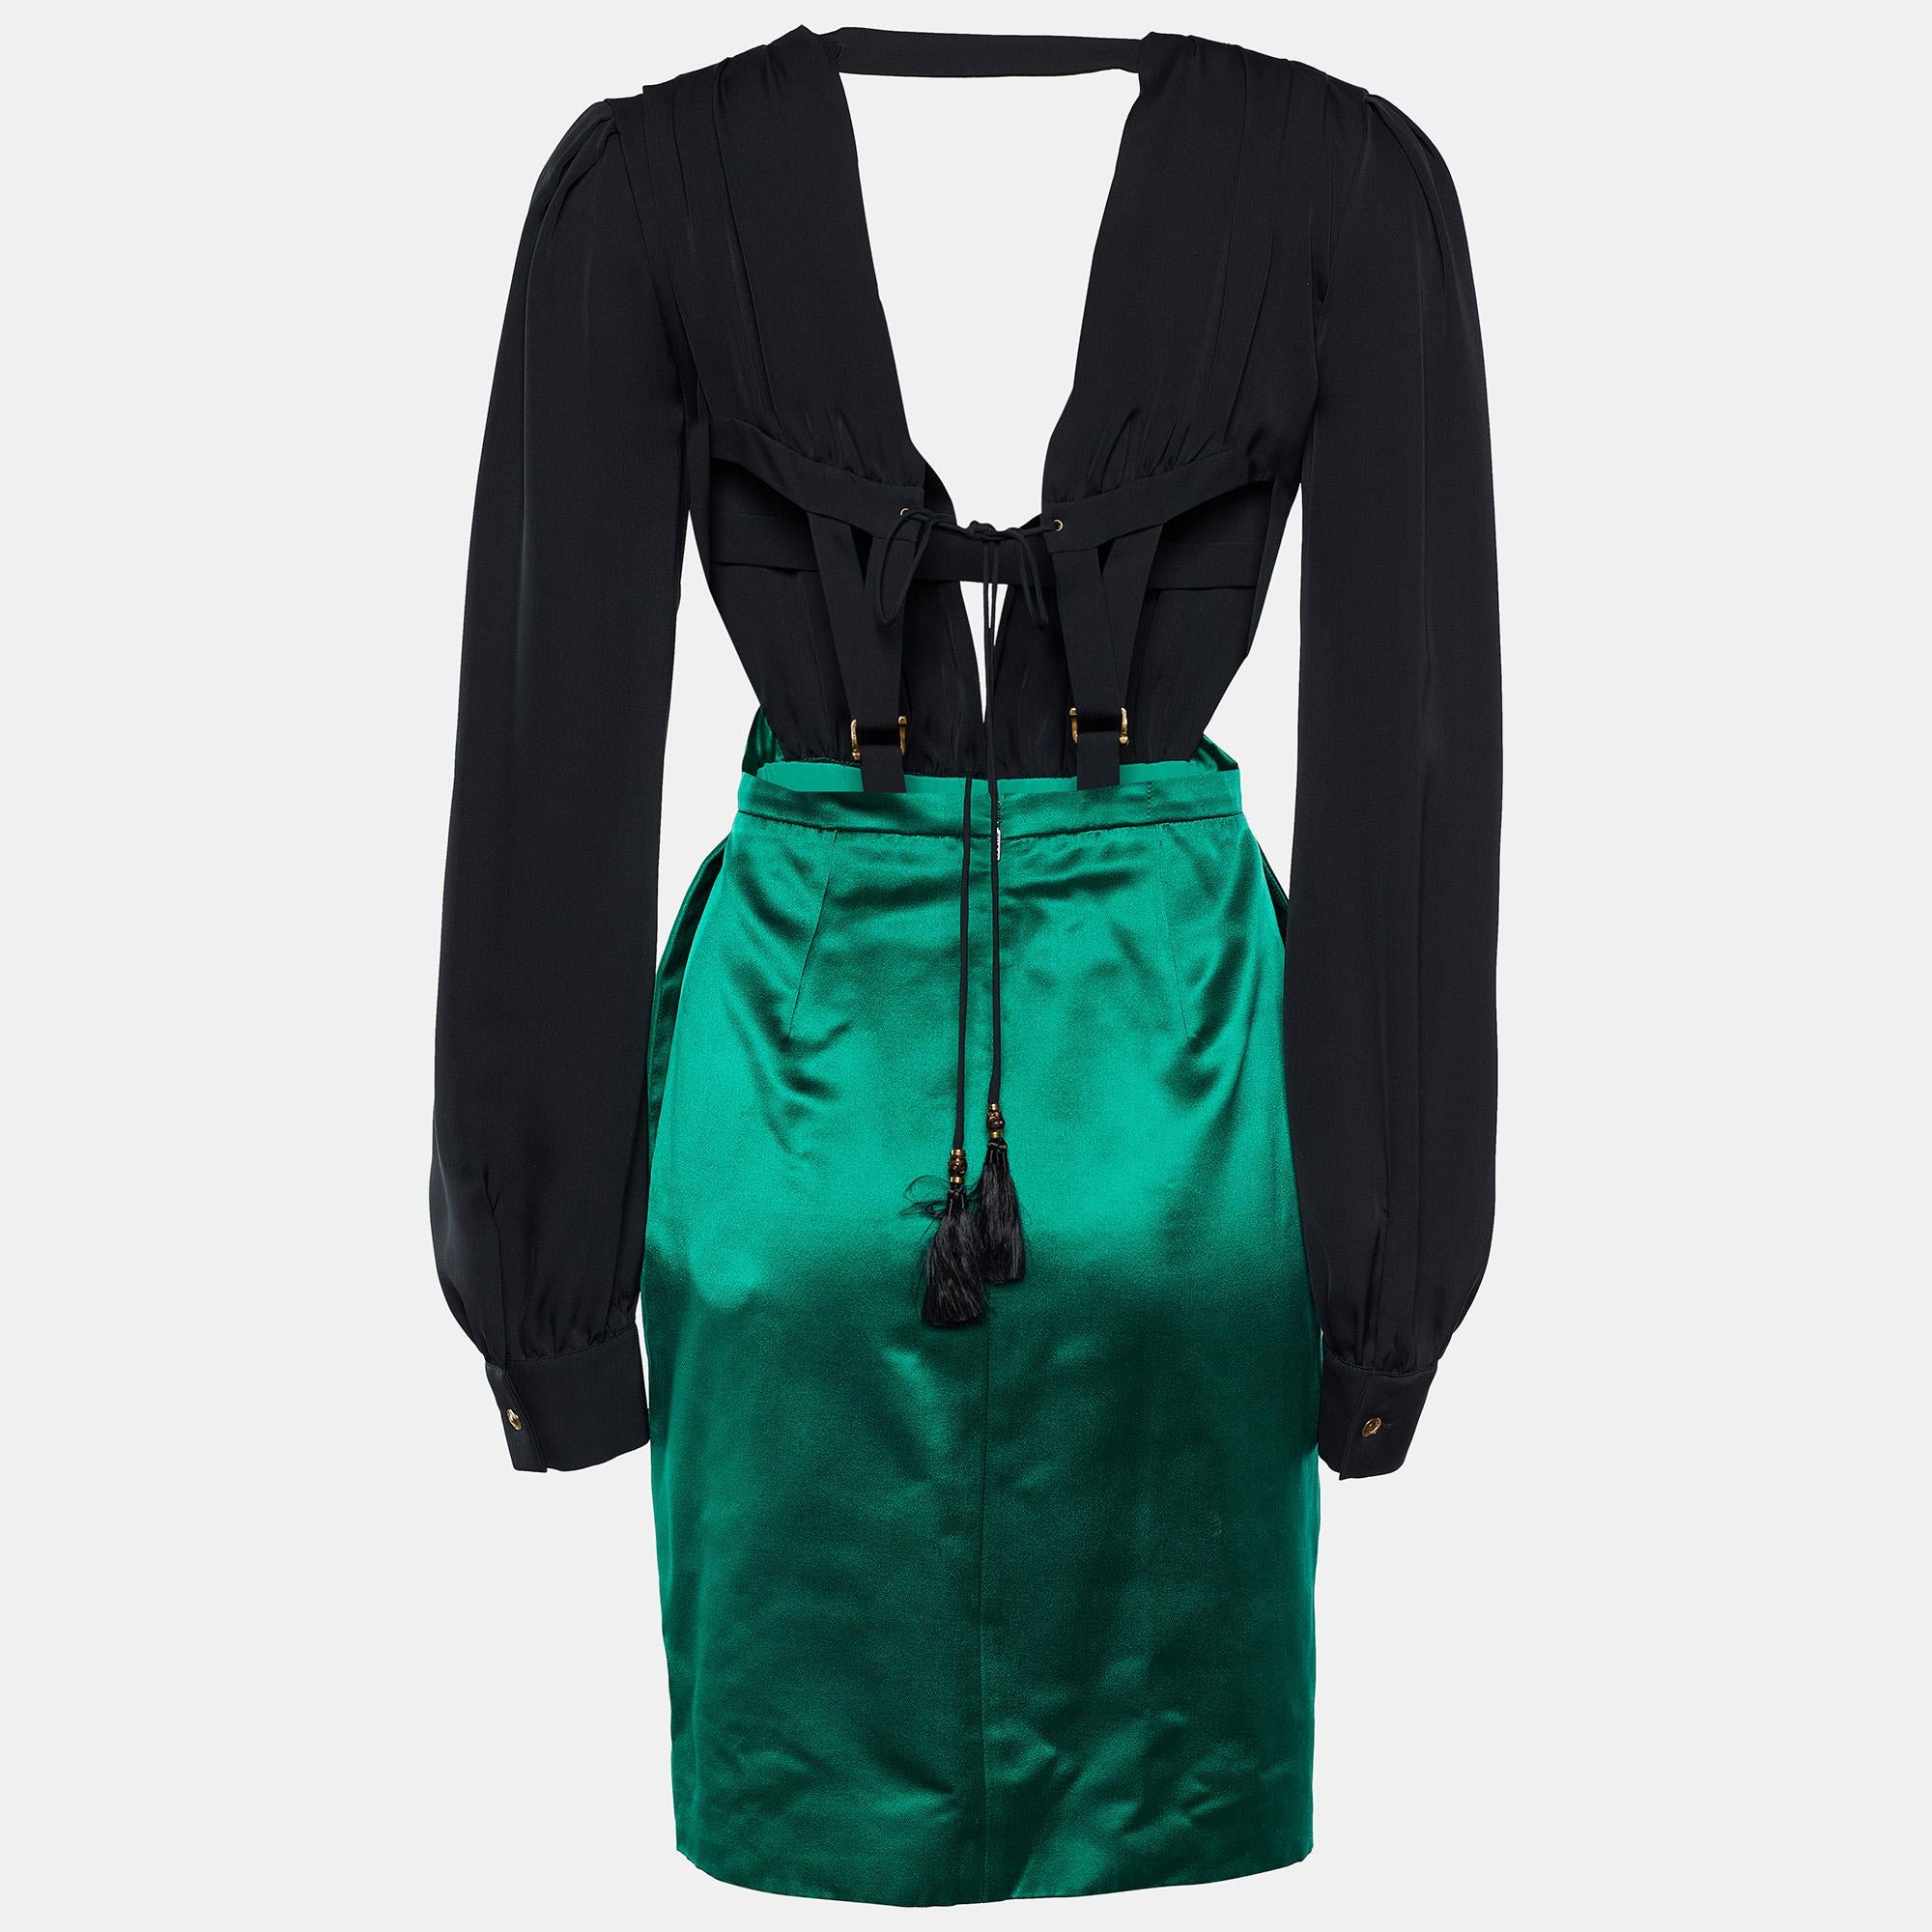 Gucci is acing its style game with this magnificent dress, and we are loving it! Covered in black and emerald green hues, this silk silhouette flaunts an audacious backless style with cut-out detailing, making it the perfect party attire. Two